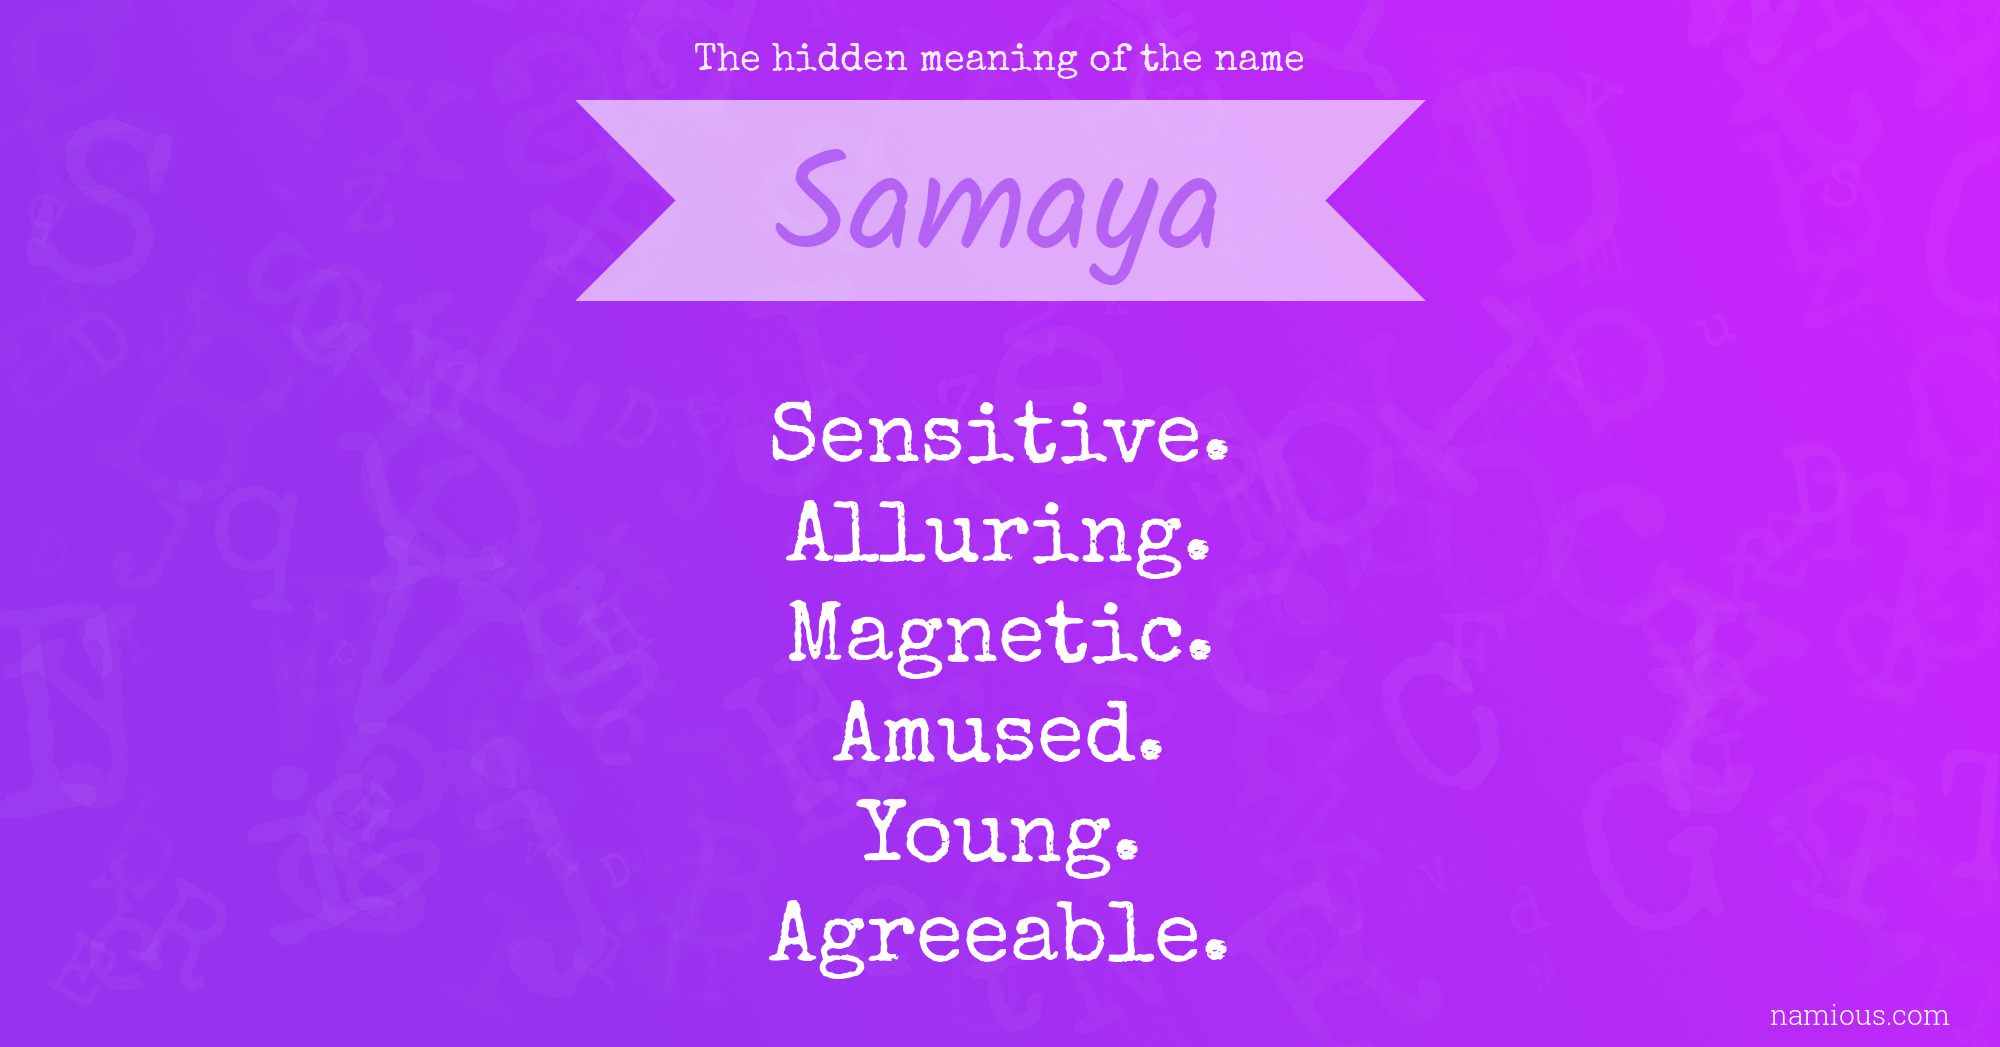 The hidden meaning of the name Samaya